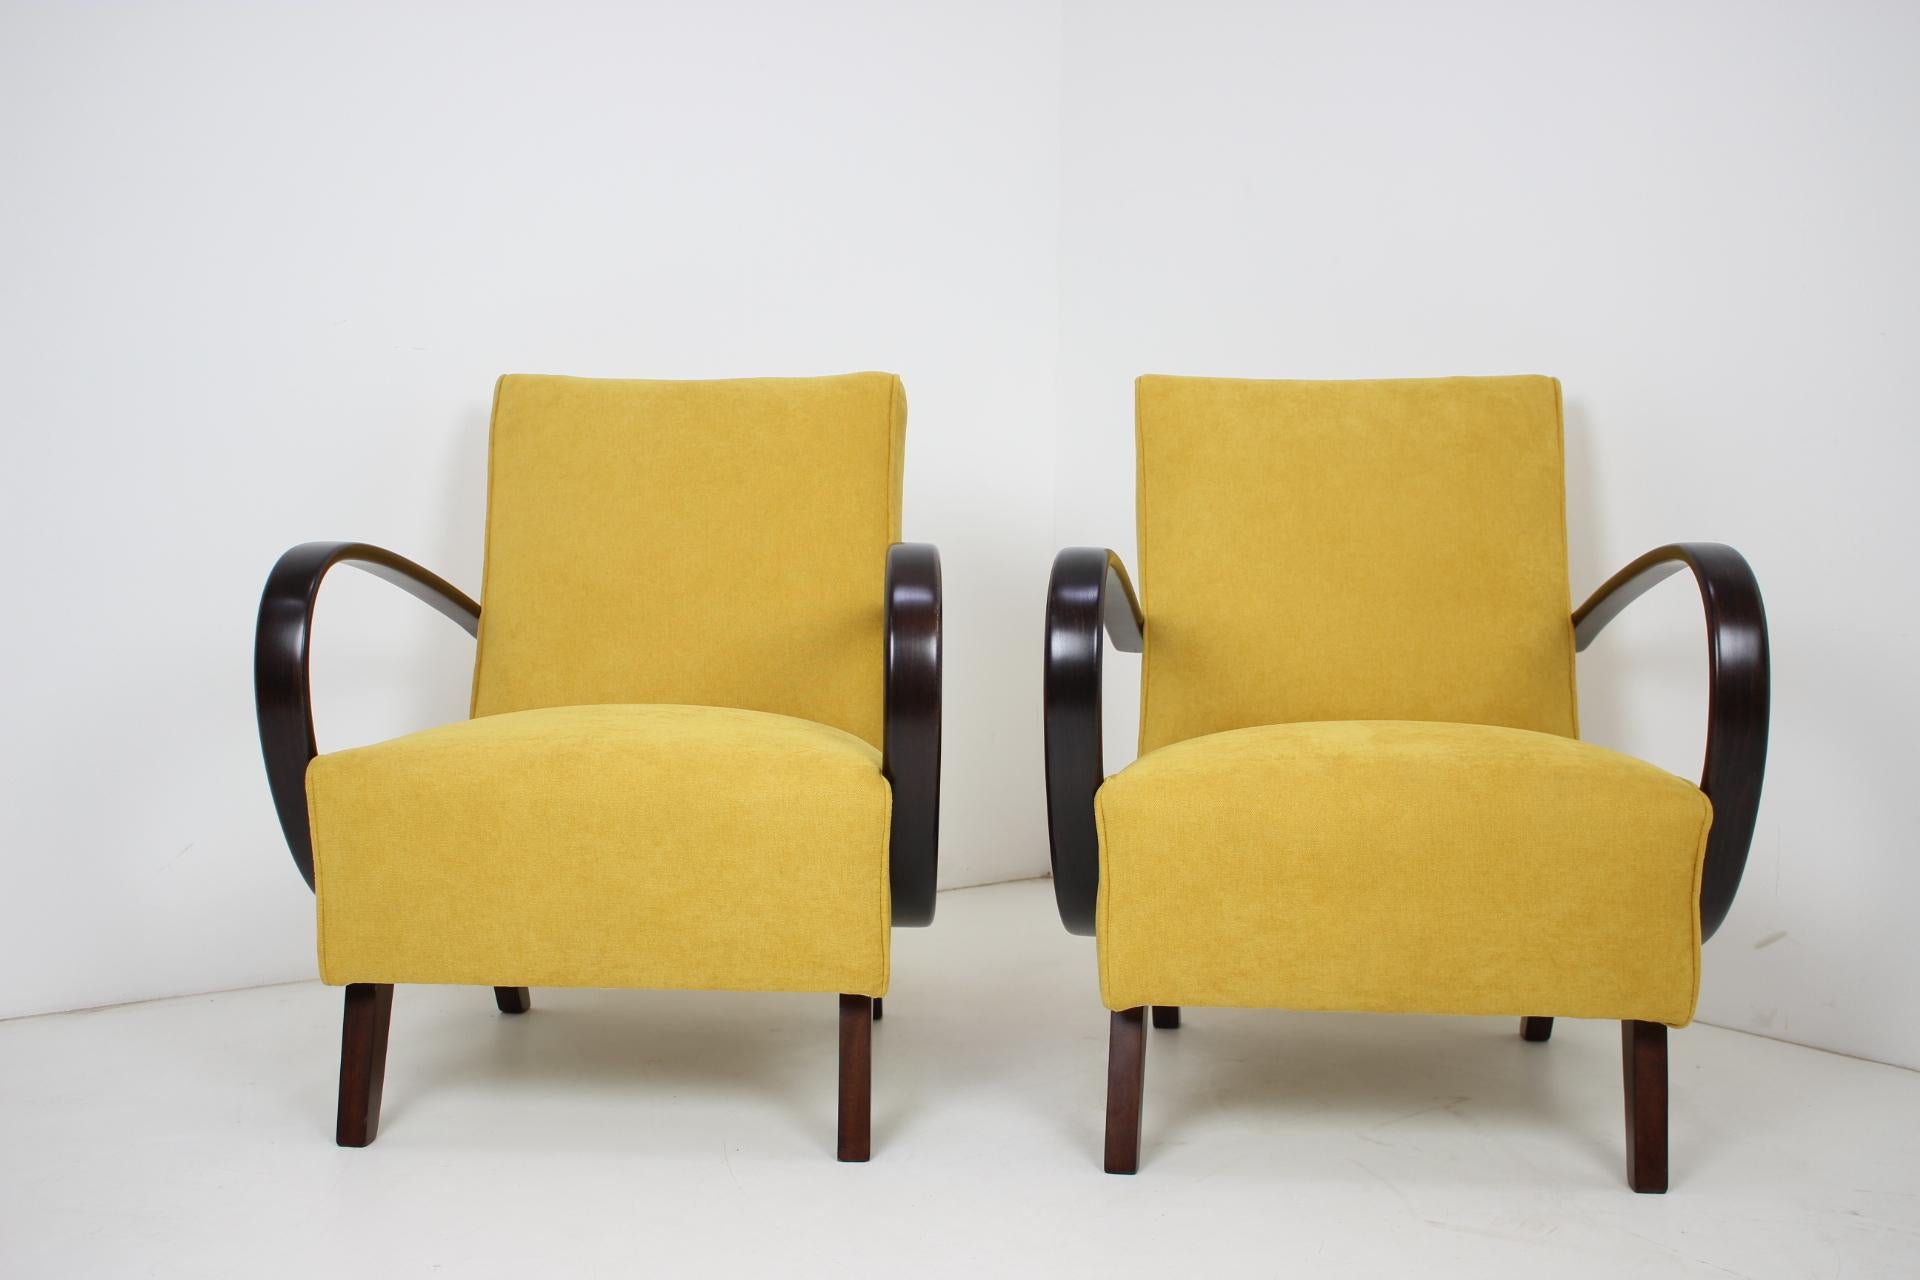 - made in Czechoslovakia
- made of wood, fabric
- restorek
- reupholstered
- very good condition.